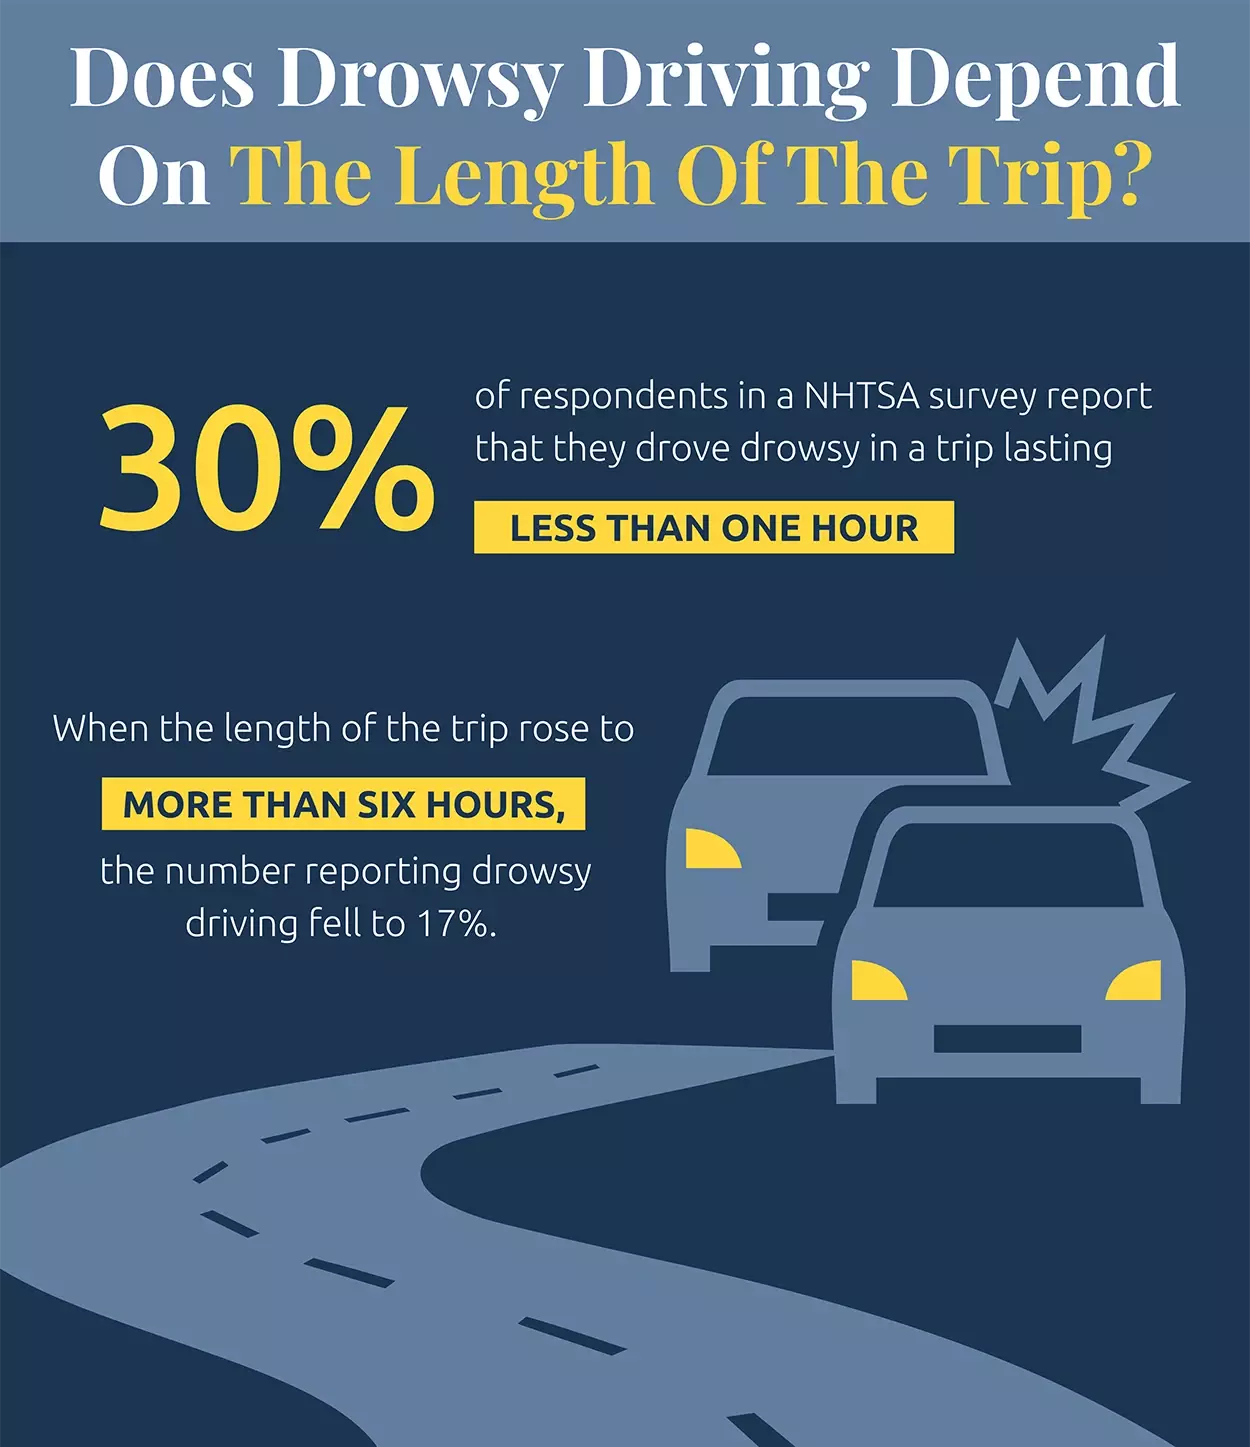 Does drowsy driving depend on the length of the trip?